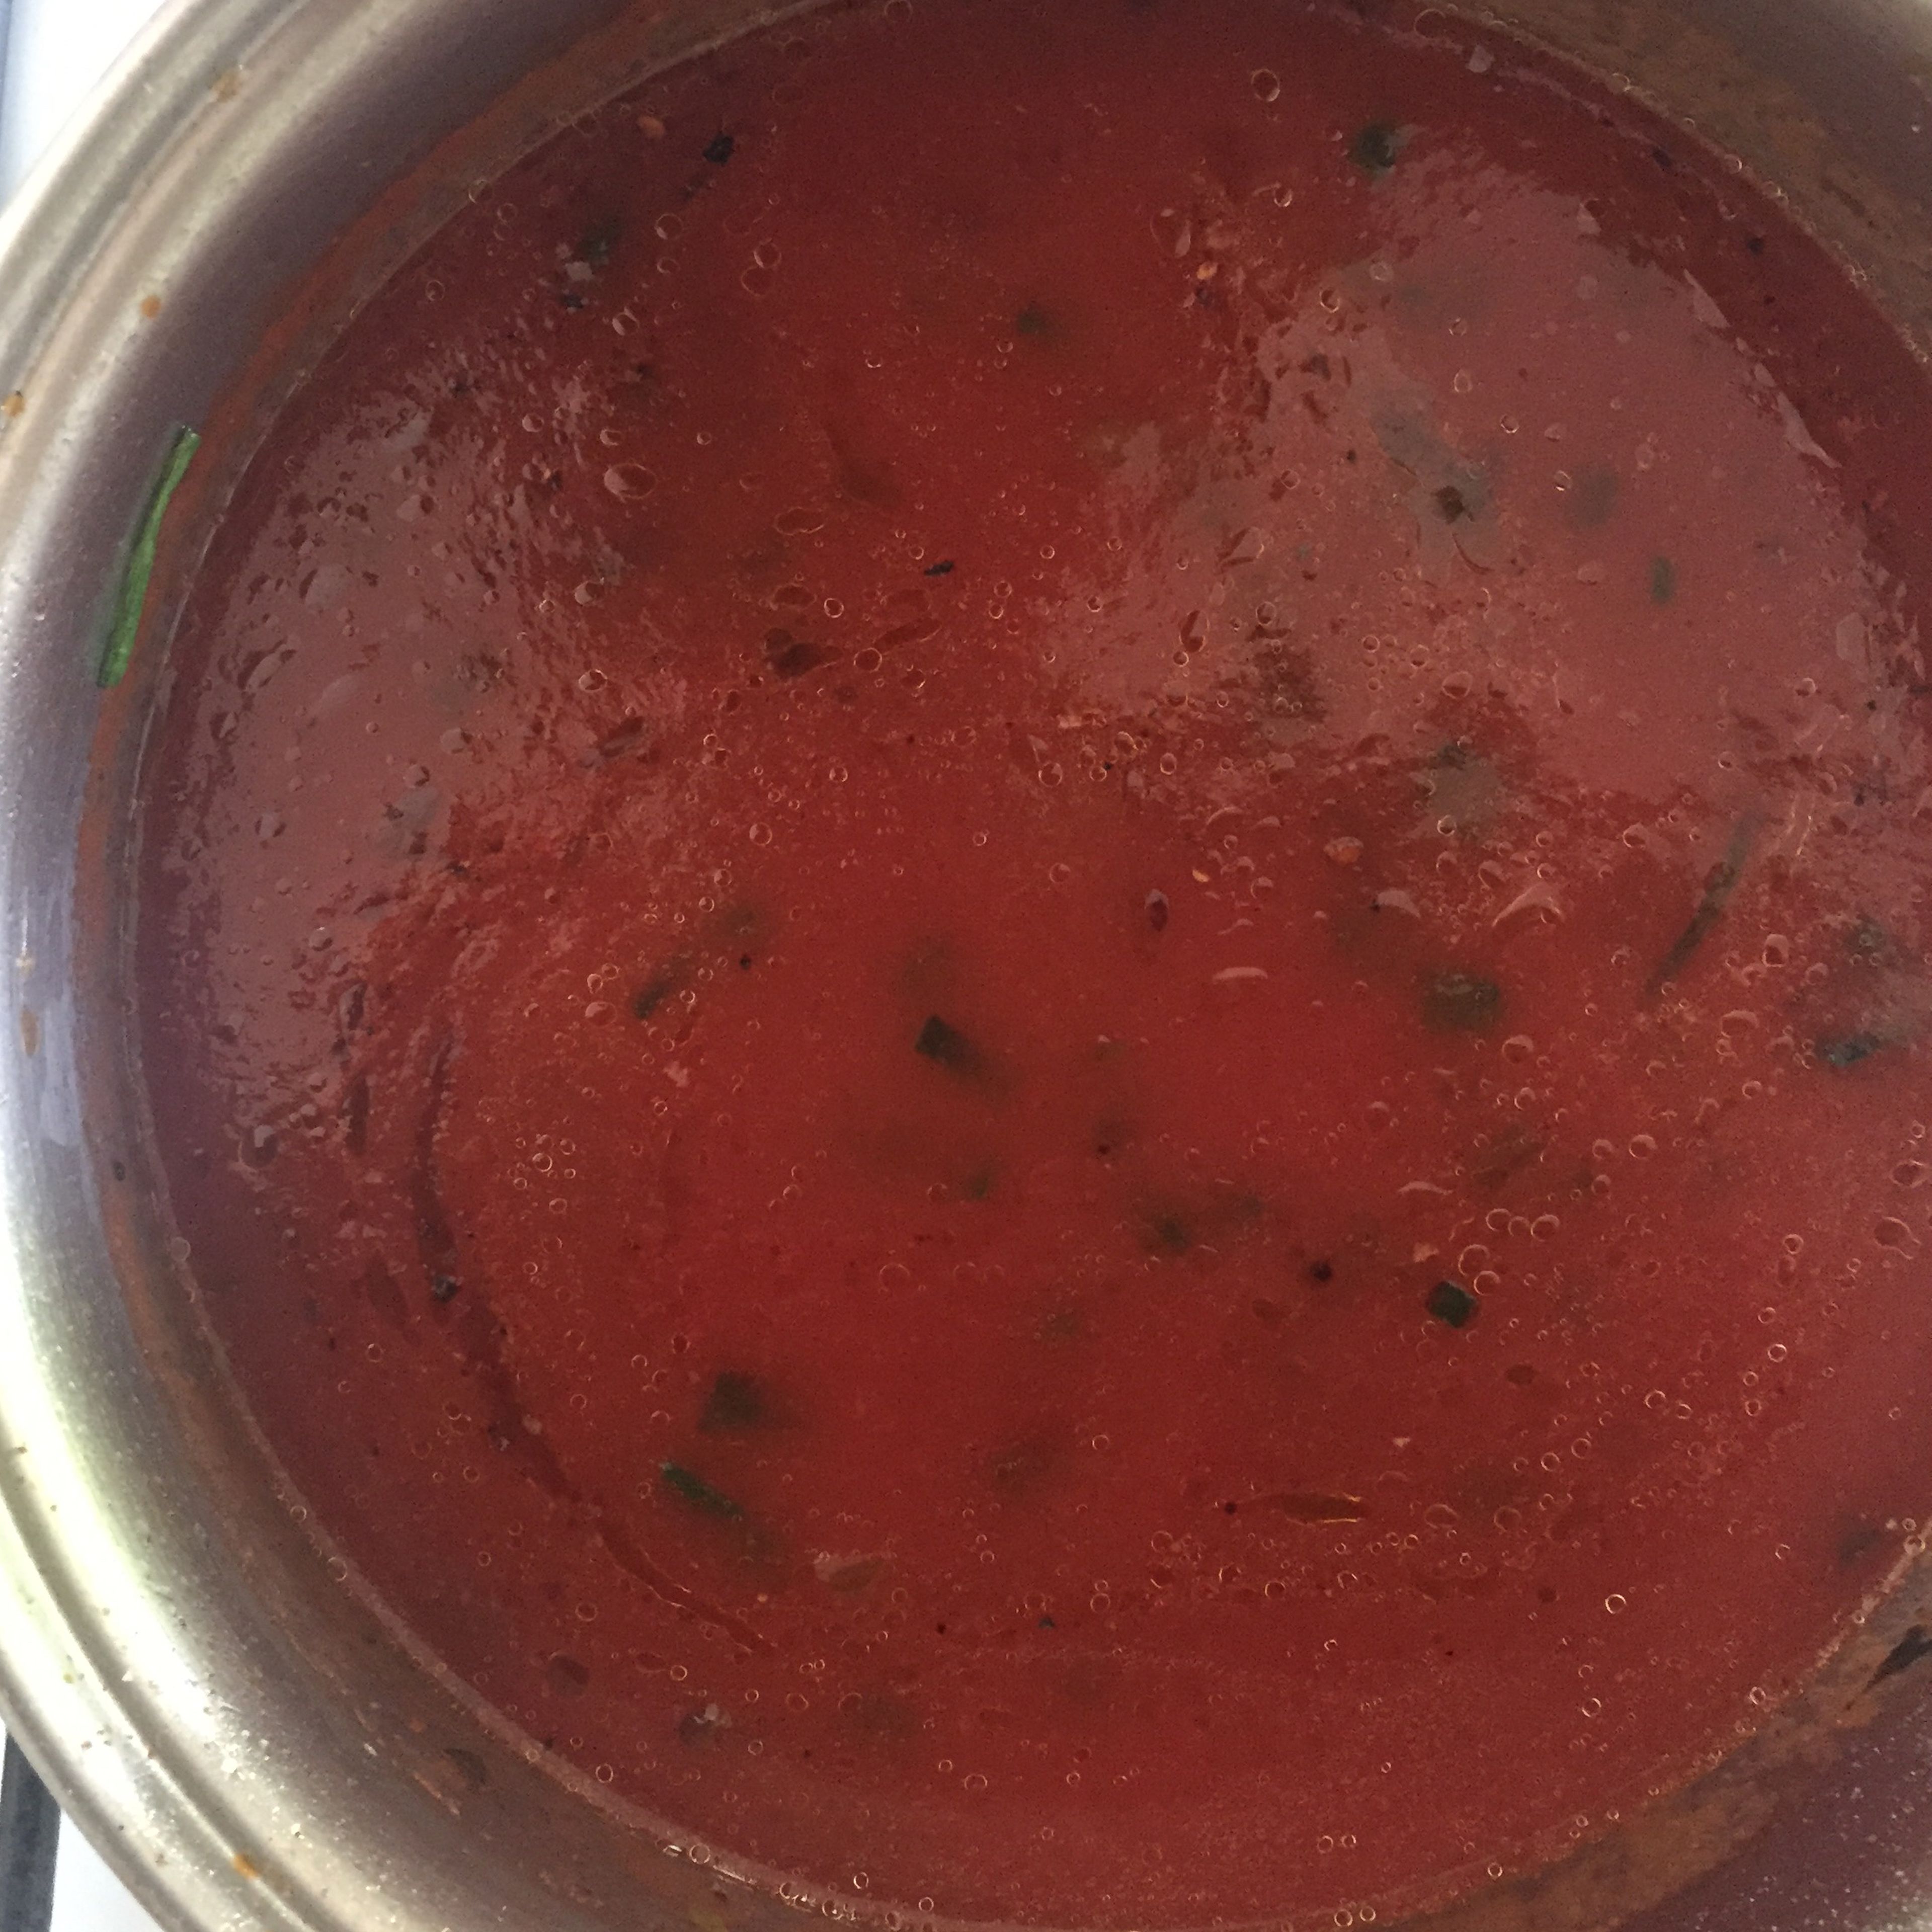 pour in a can of tomato purée, and season to taste. I recommend using oregano, chili flakes, paprika, salt, pepper and sugar. Let boil for a few minutes, then set aside